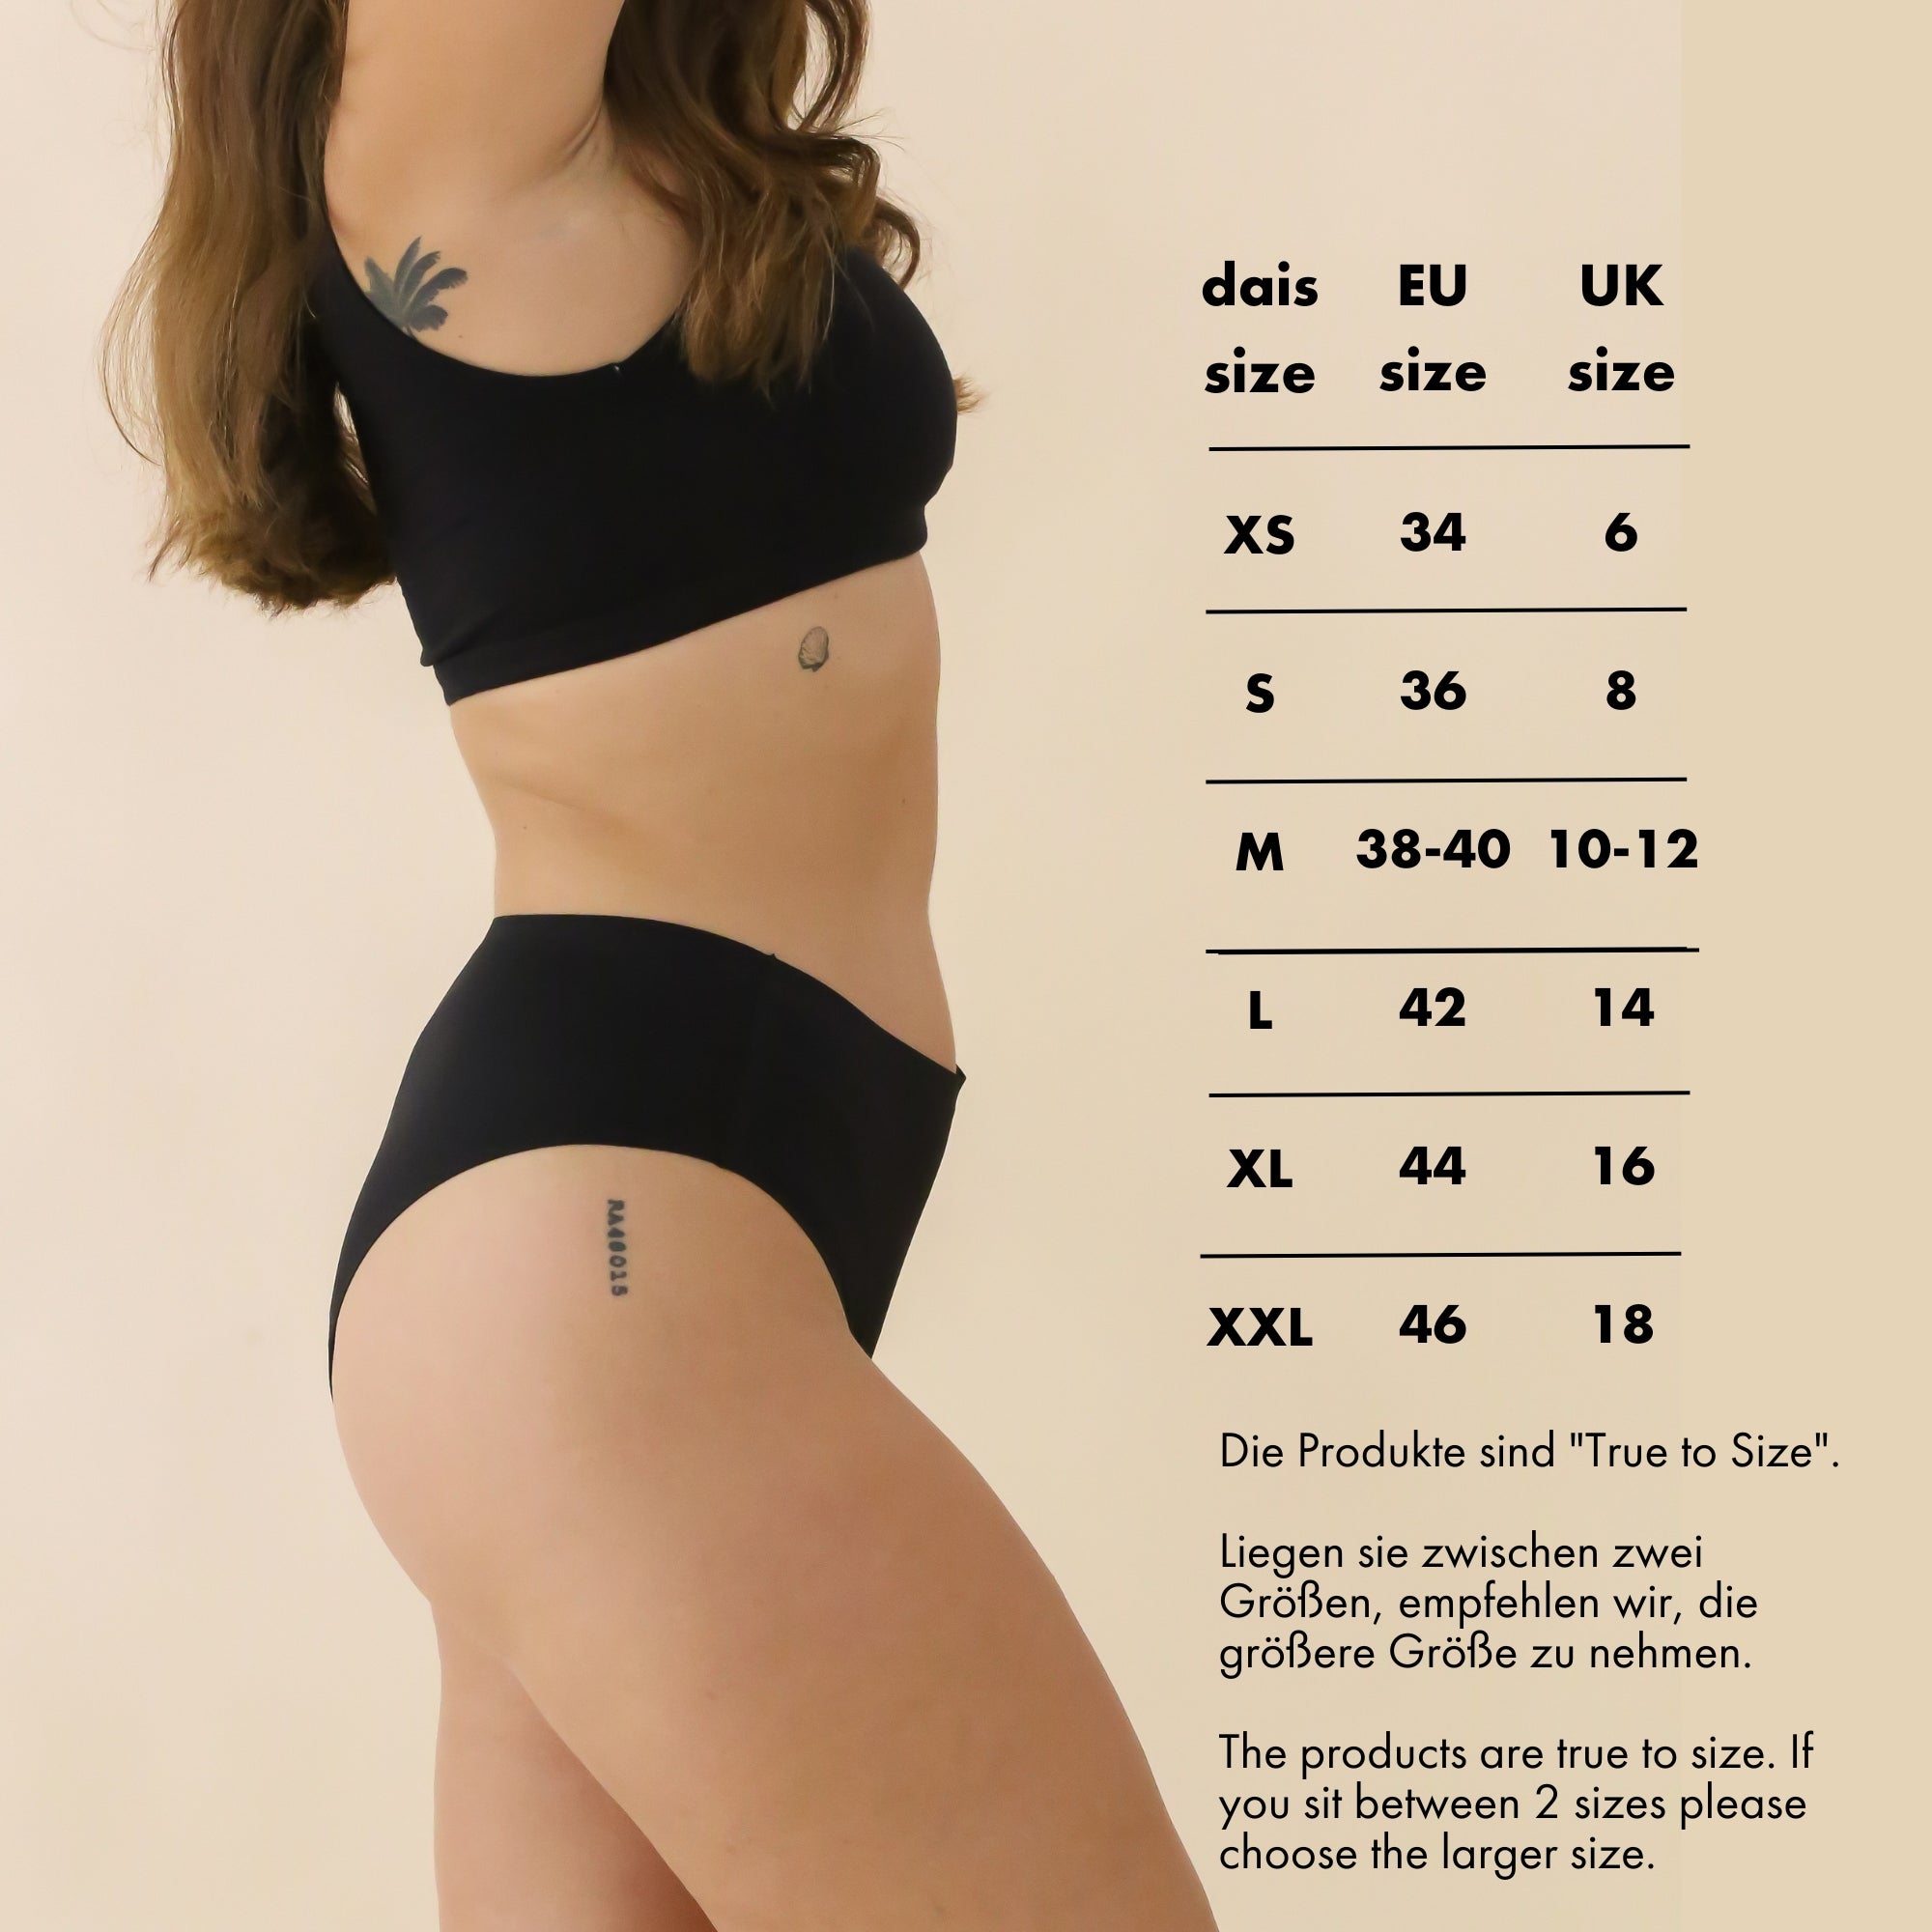 Size chart for dais period underwear in hipster and cheeky cut with options XS, S, M, L, XL,XXL with EU and UK size conversions.